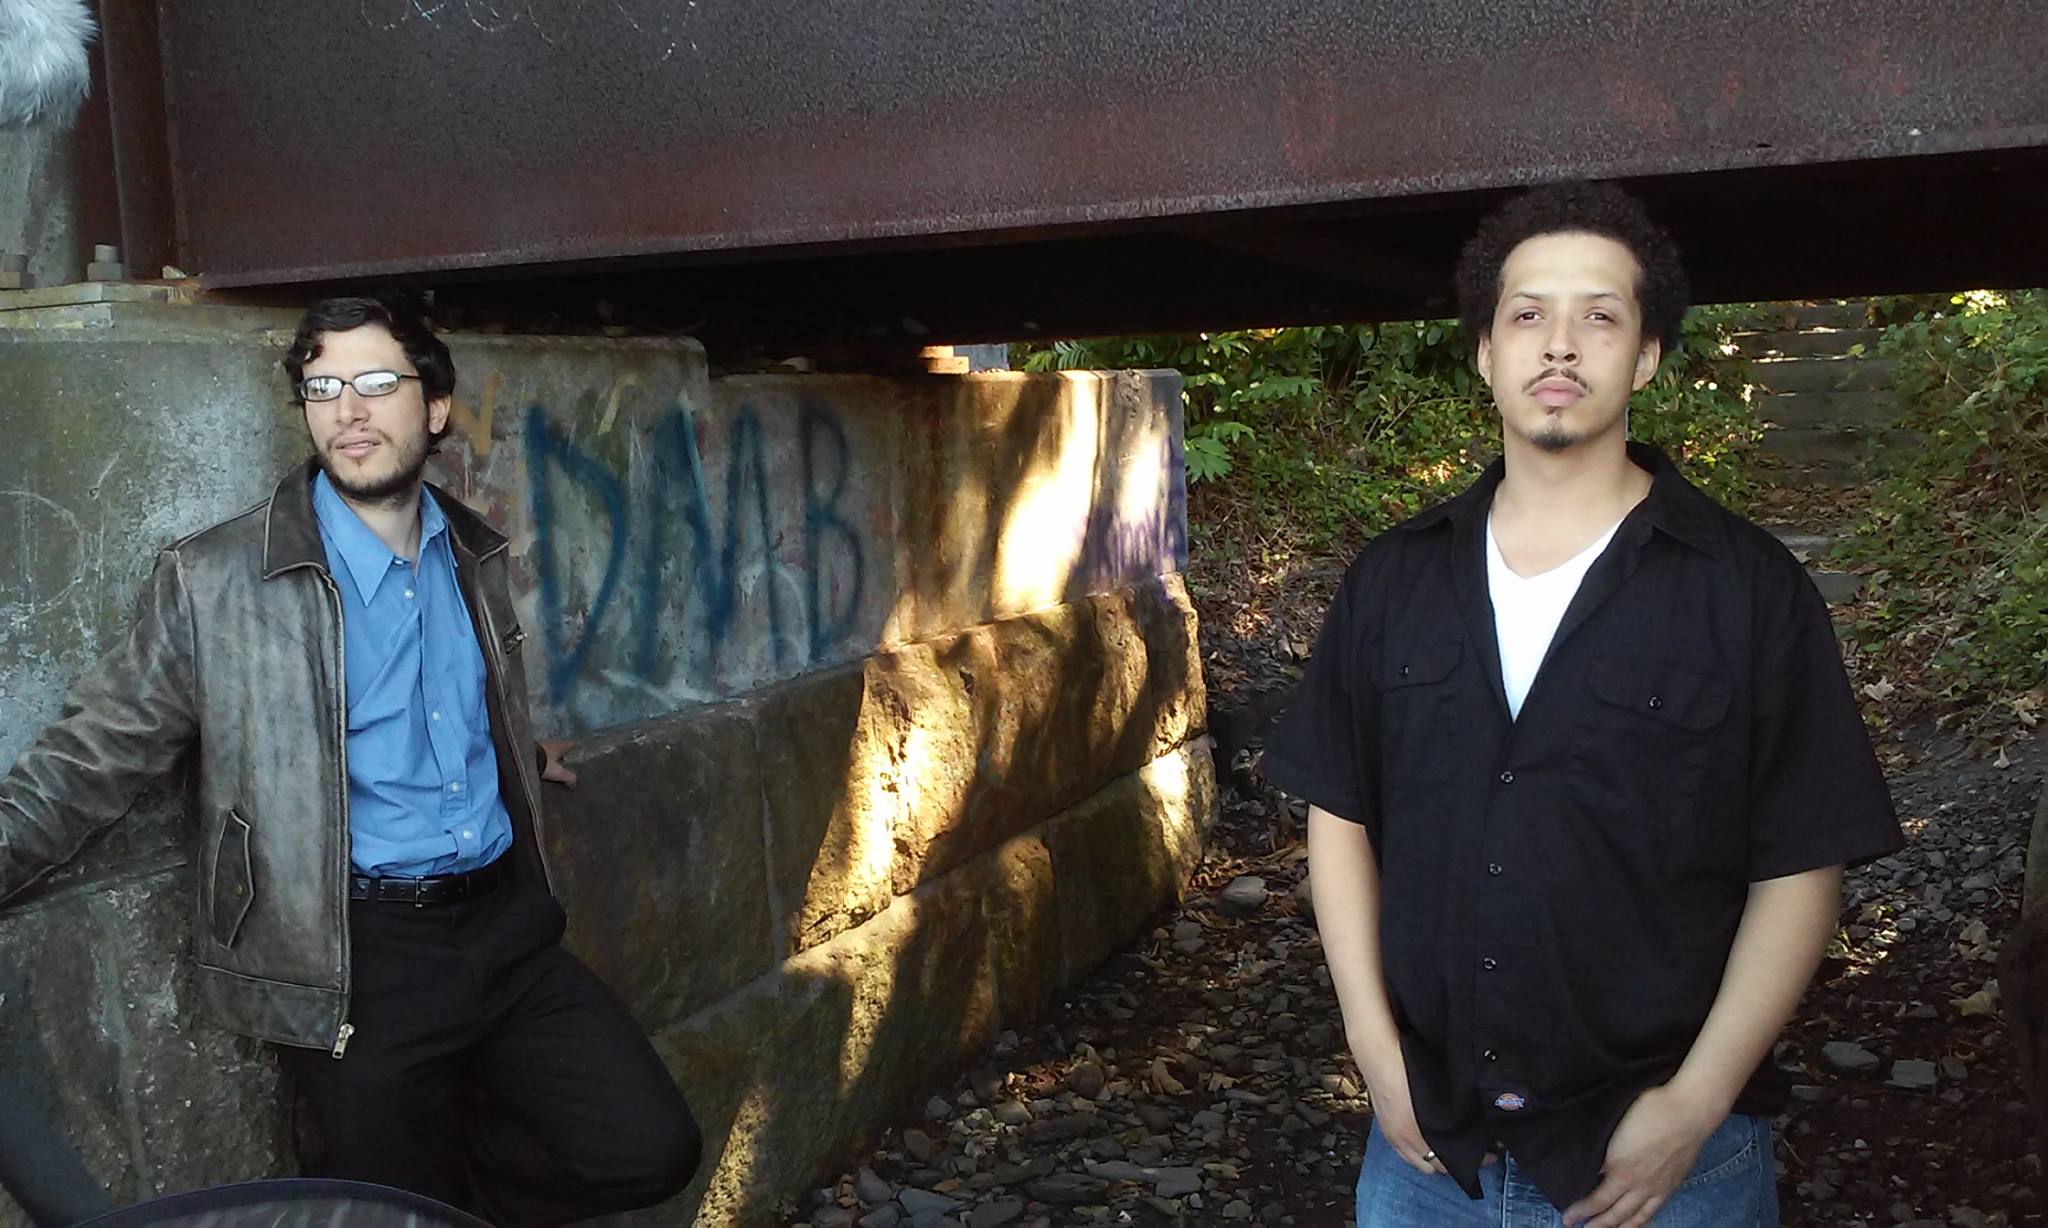 Actors Aaron Andrade (Jack) and Ken Holmes (Walter) on the set of the short film 